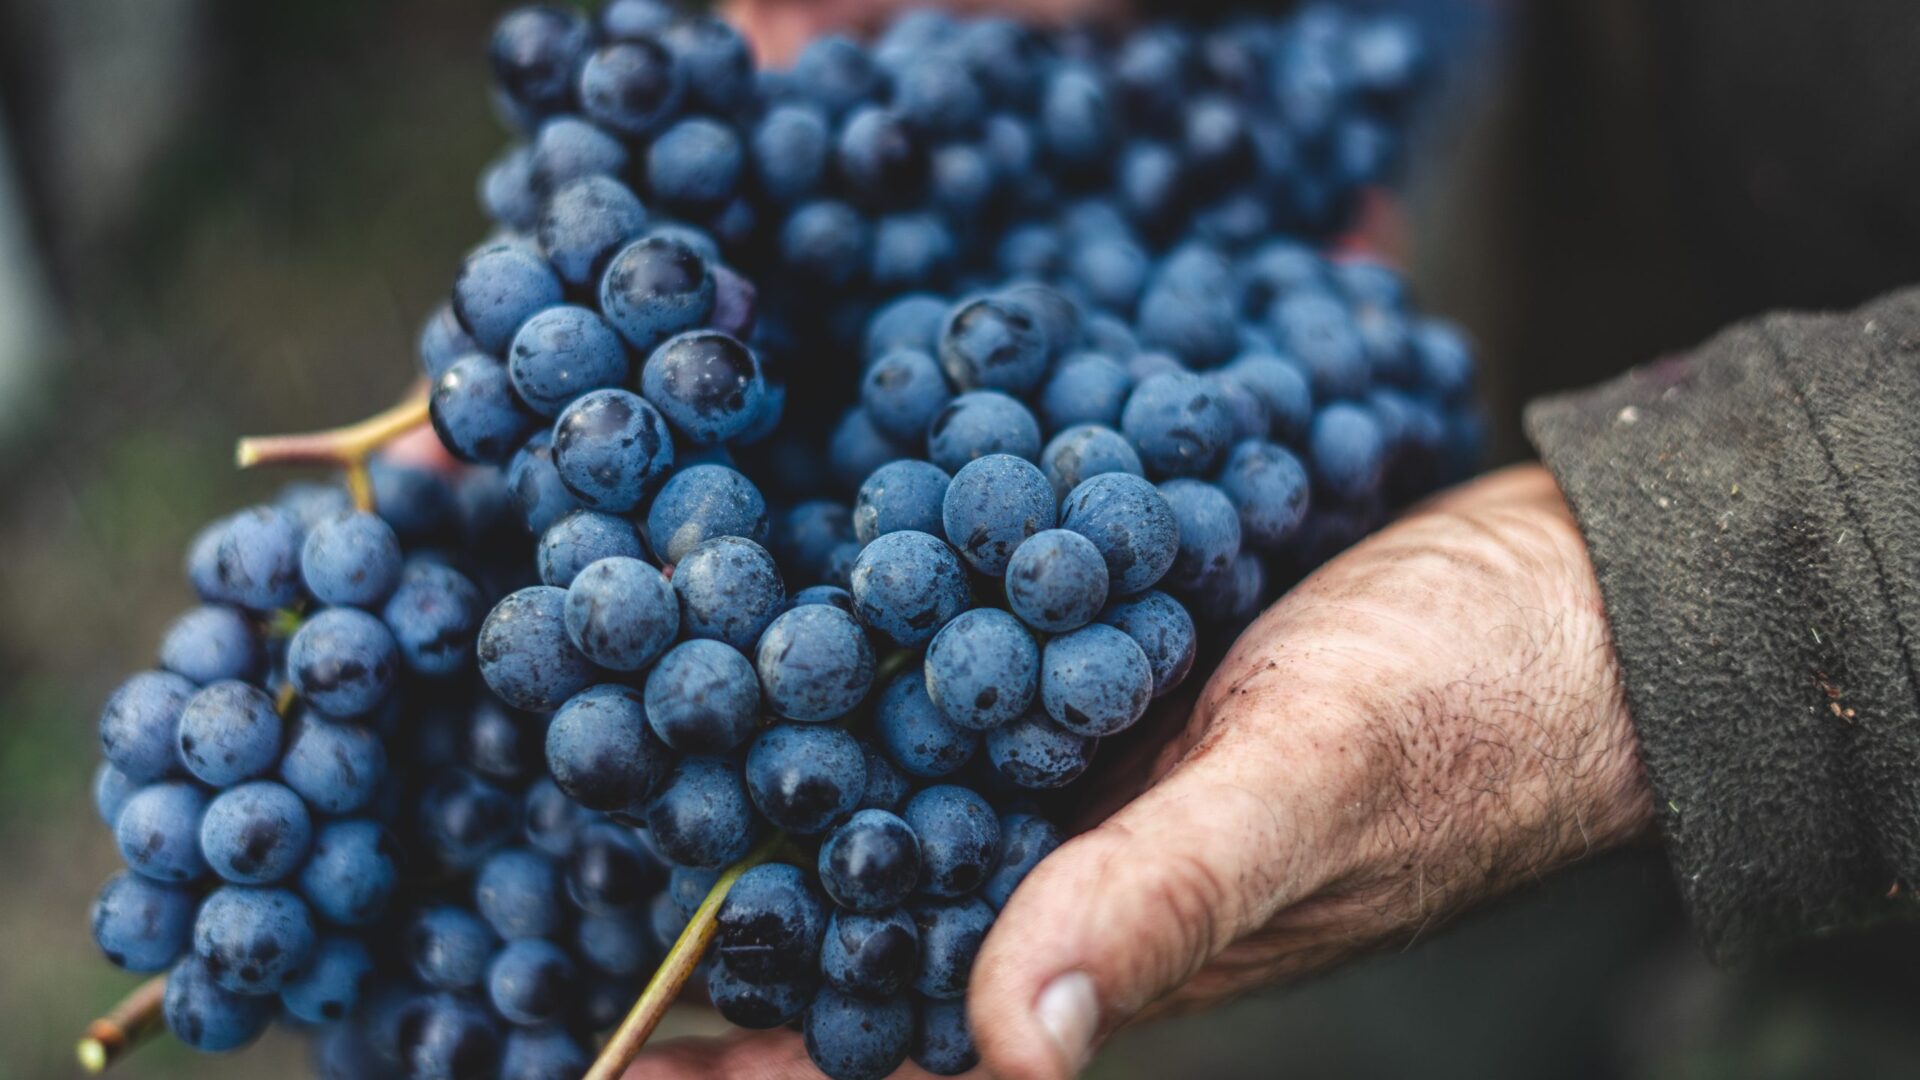 Harvesting Nebbiolo grapes in Serralunga, Italy. Grapes will be used in the process to make Barolo, one of the most famous red wine.